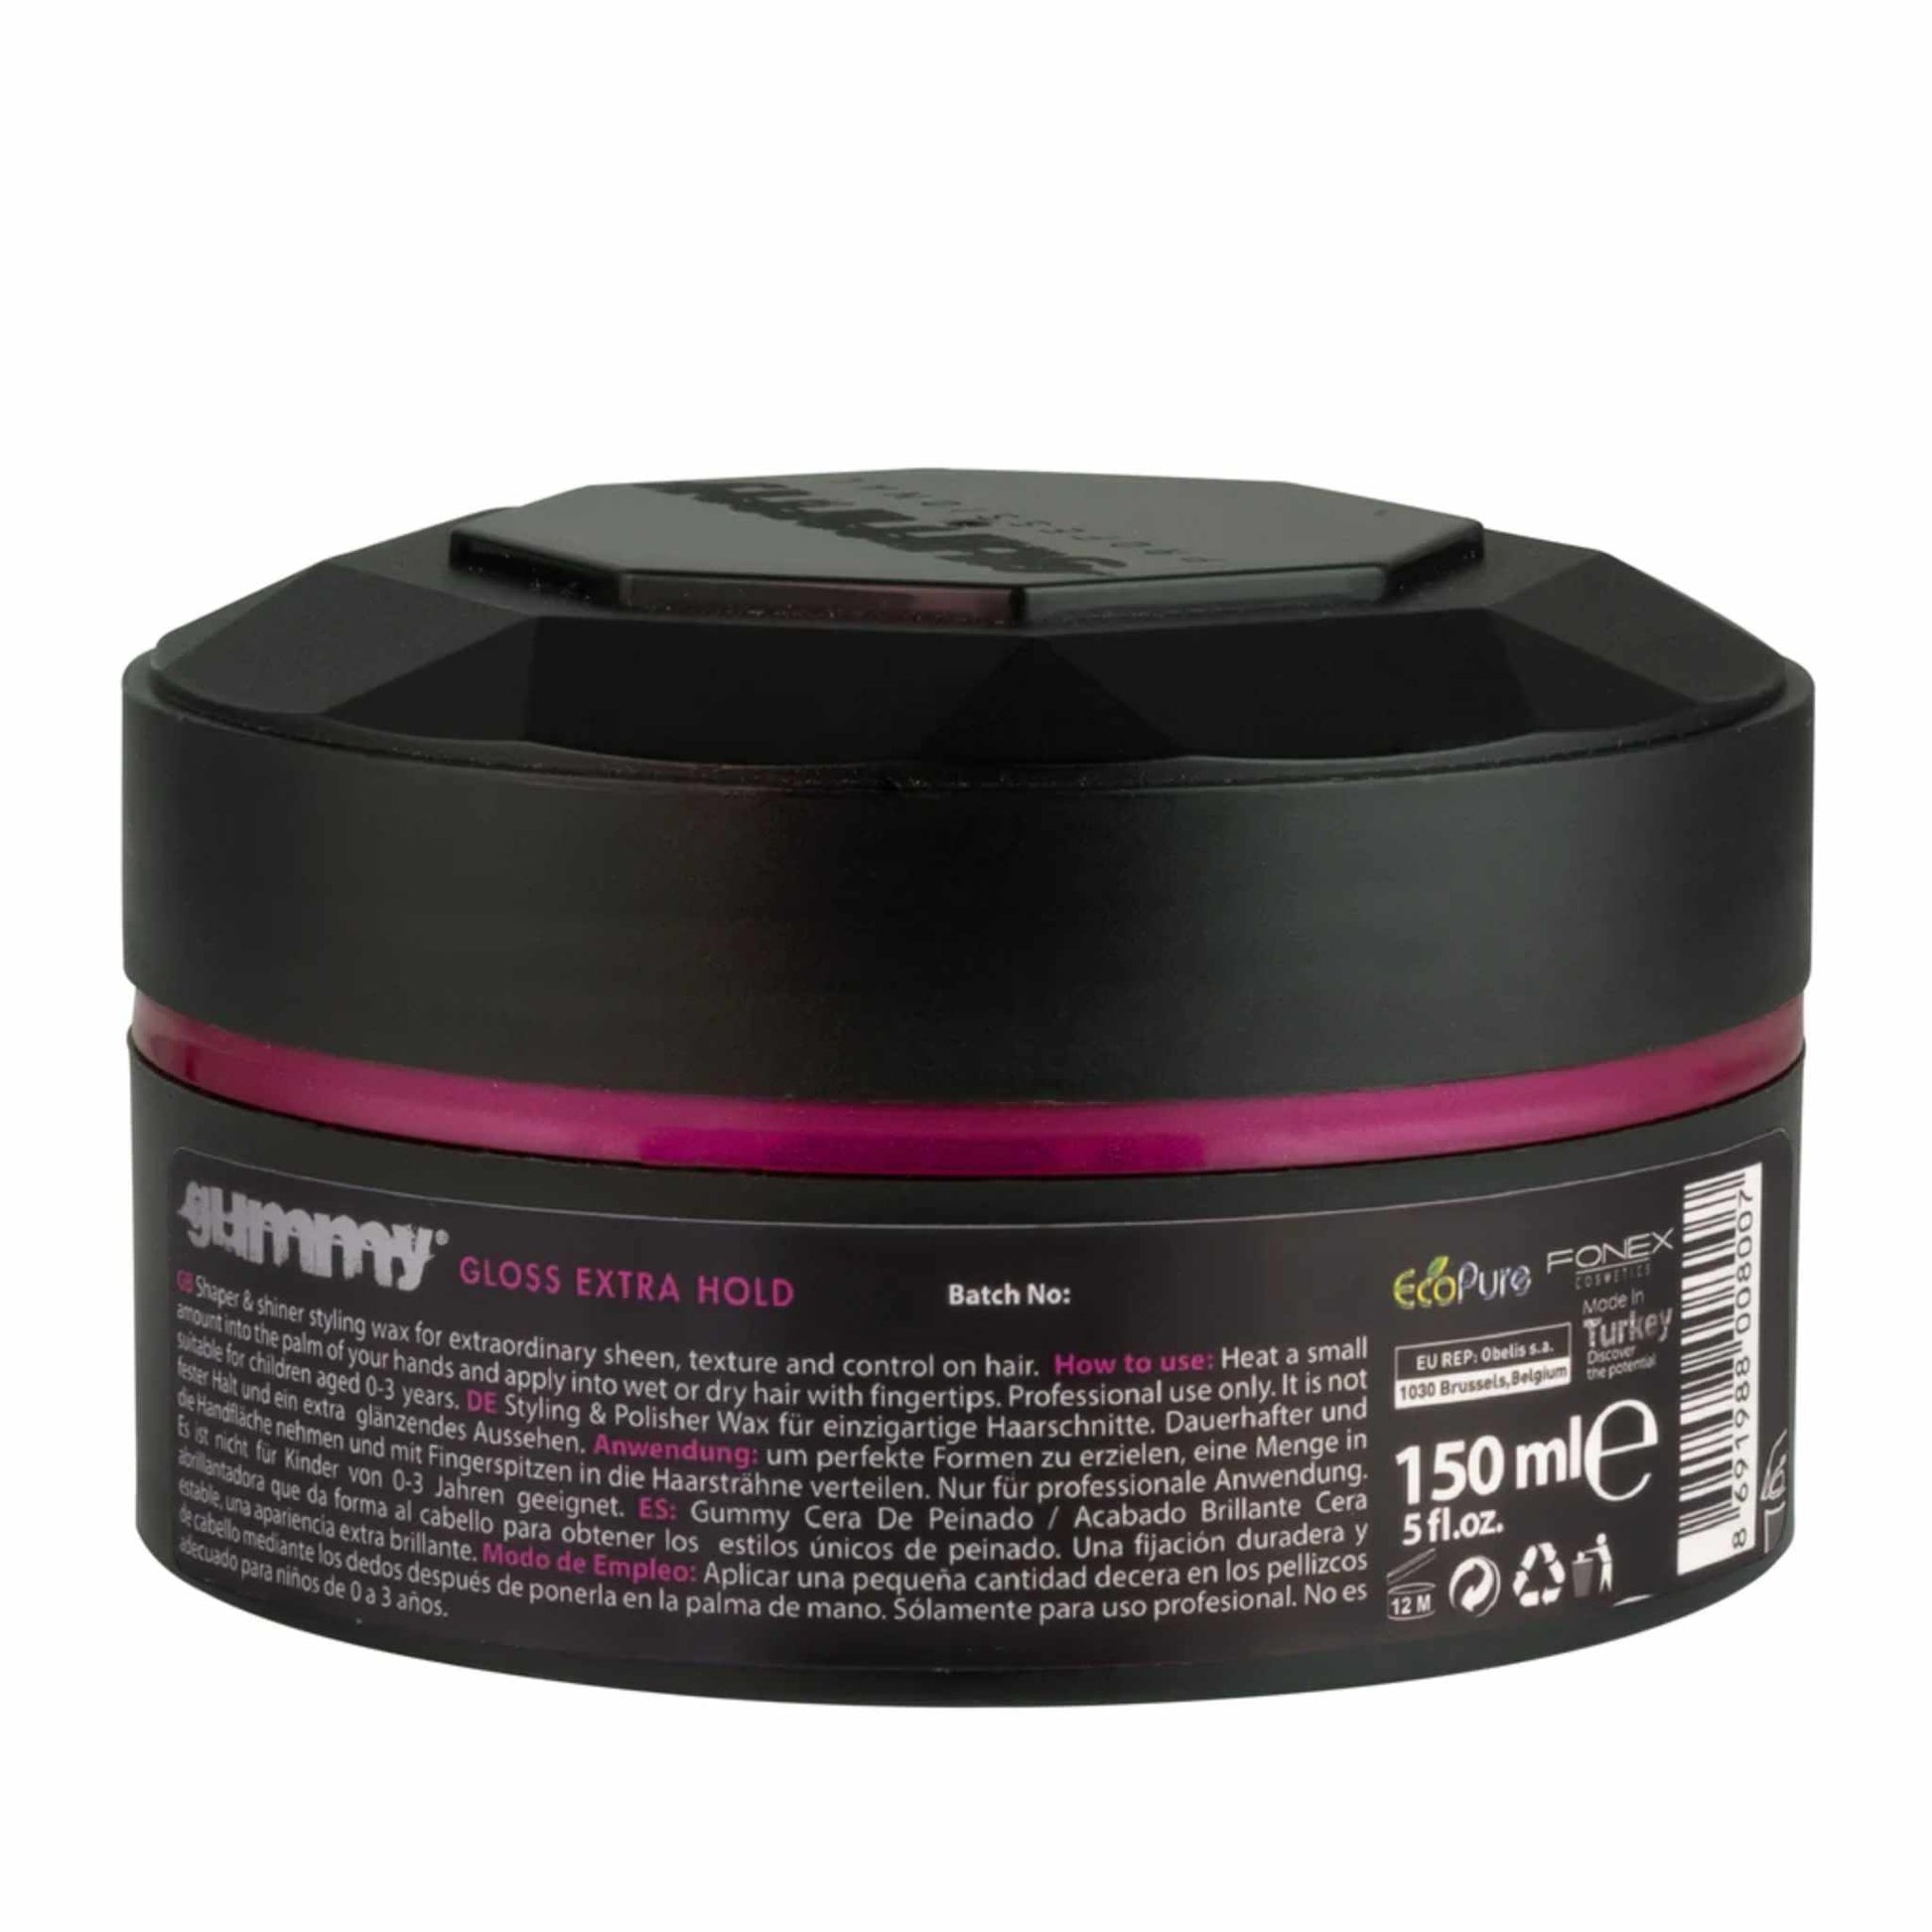 Gummy Styling Wax Gloss Extra Hold Backside Instruction Label